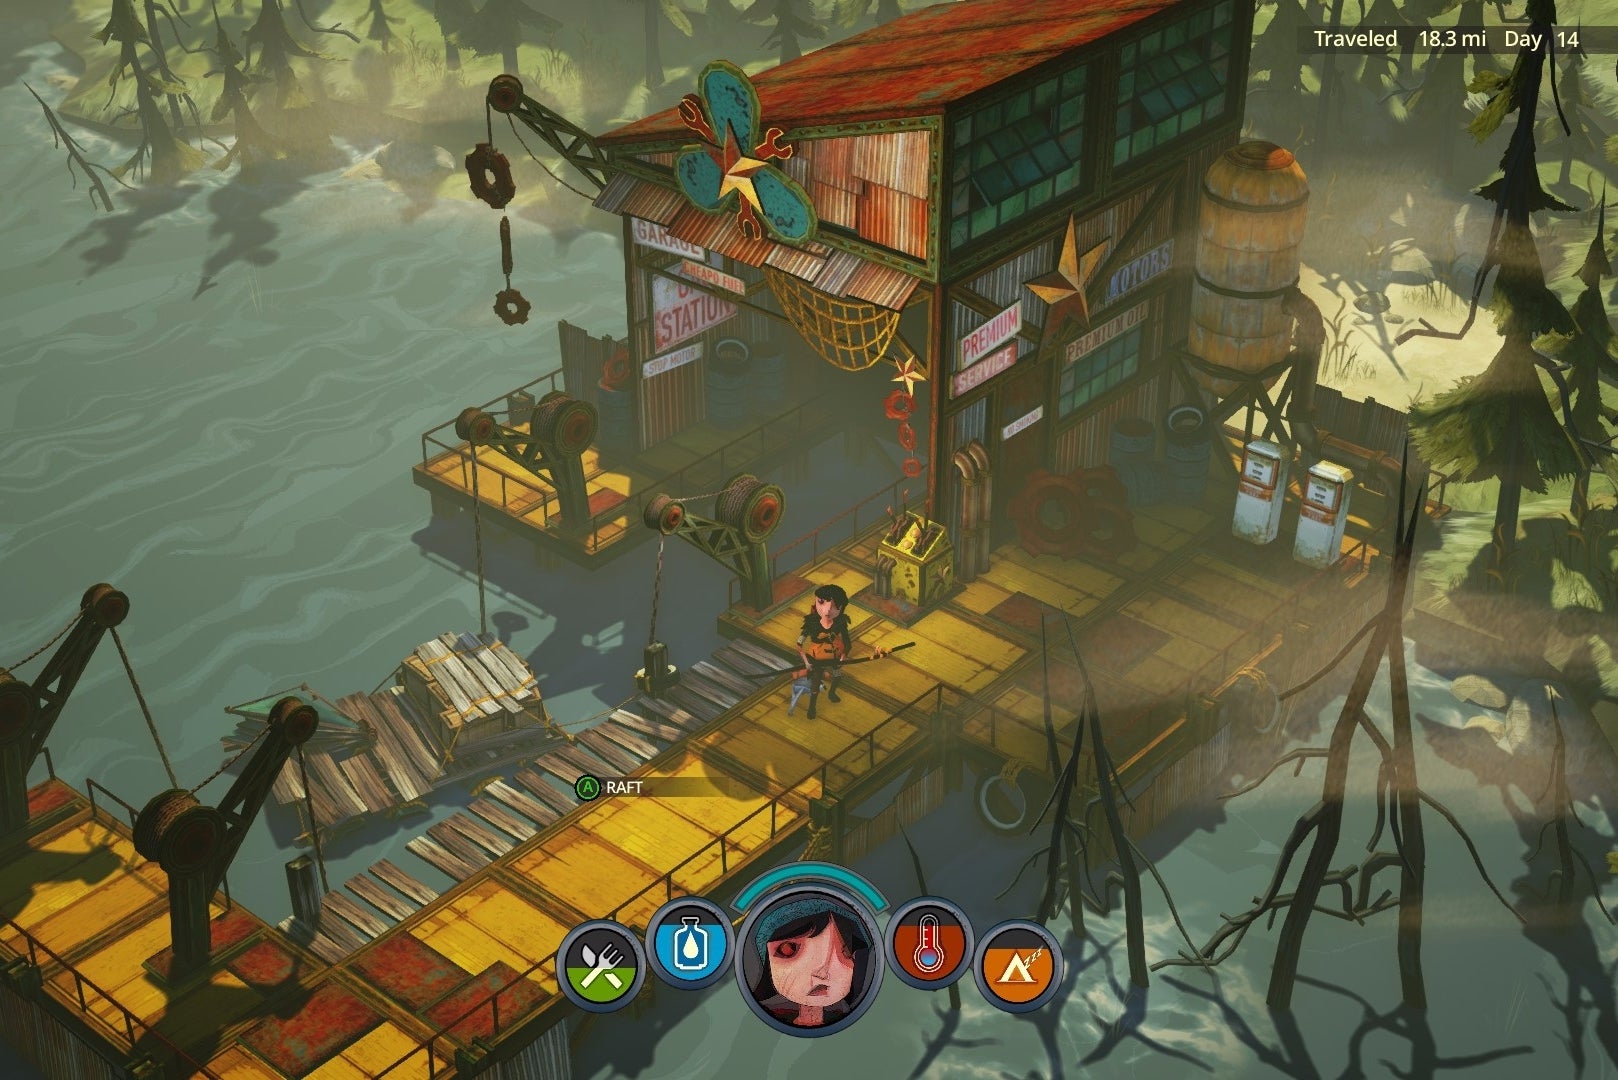 Image for The Flame in the Flood, Human: Fall Flat headed to Nintendo Switch